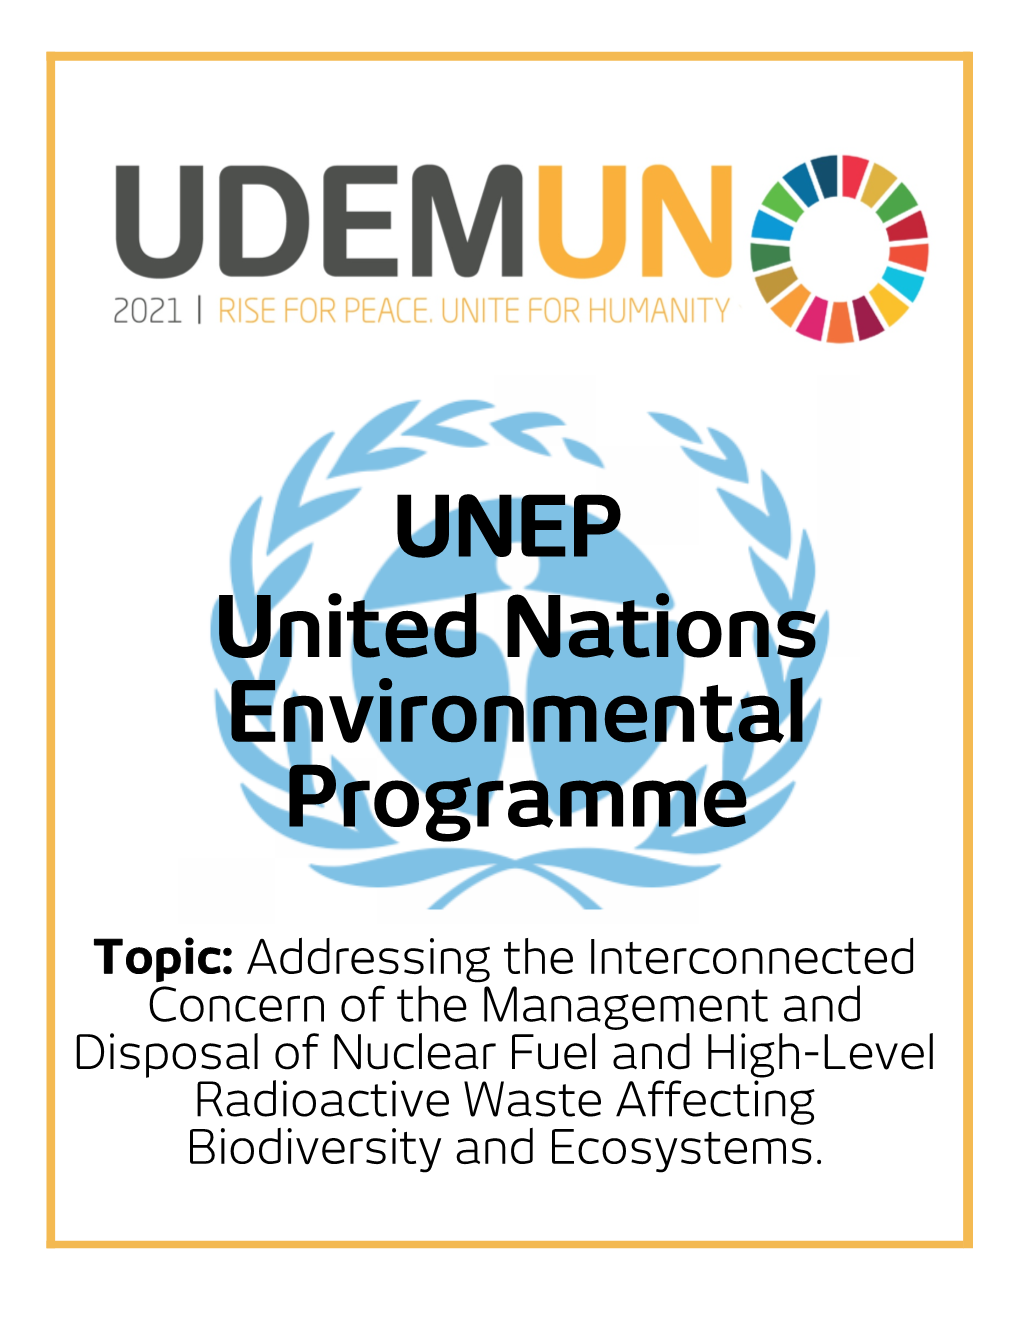 UNEP United Nations Environmental Programme